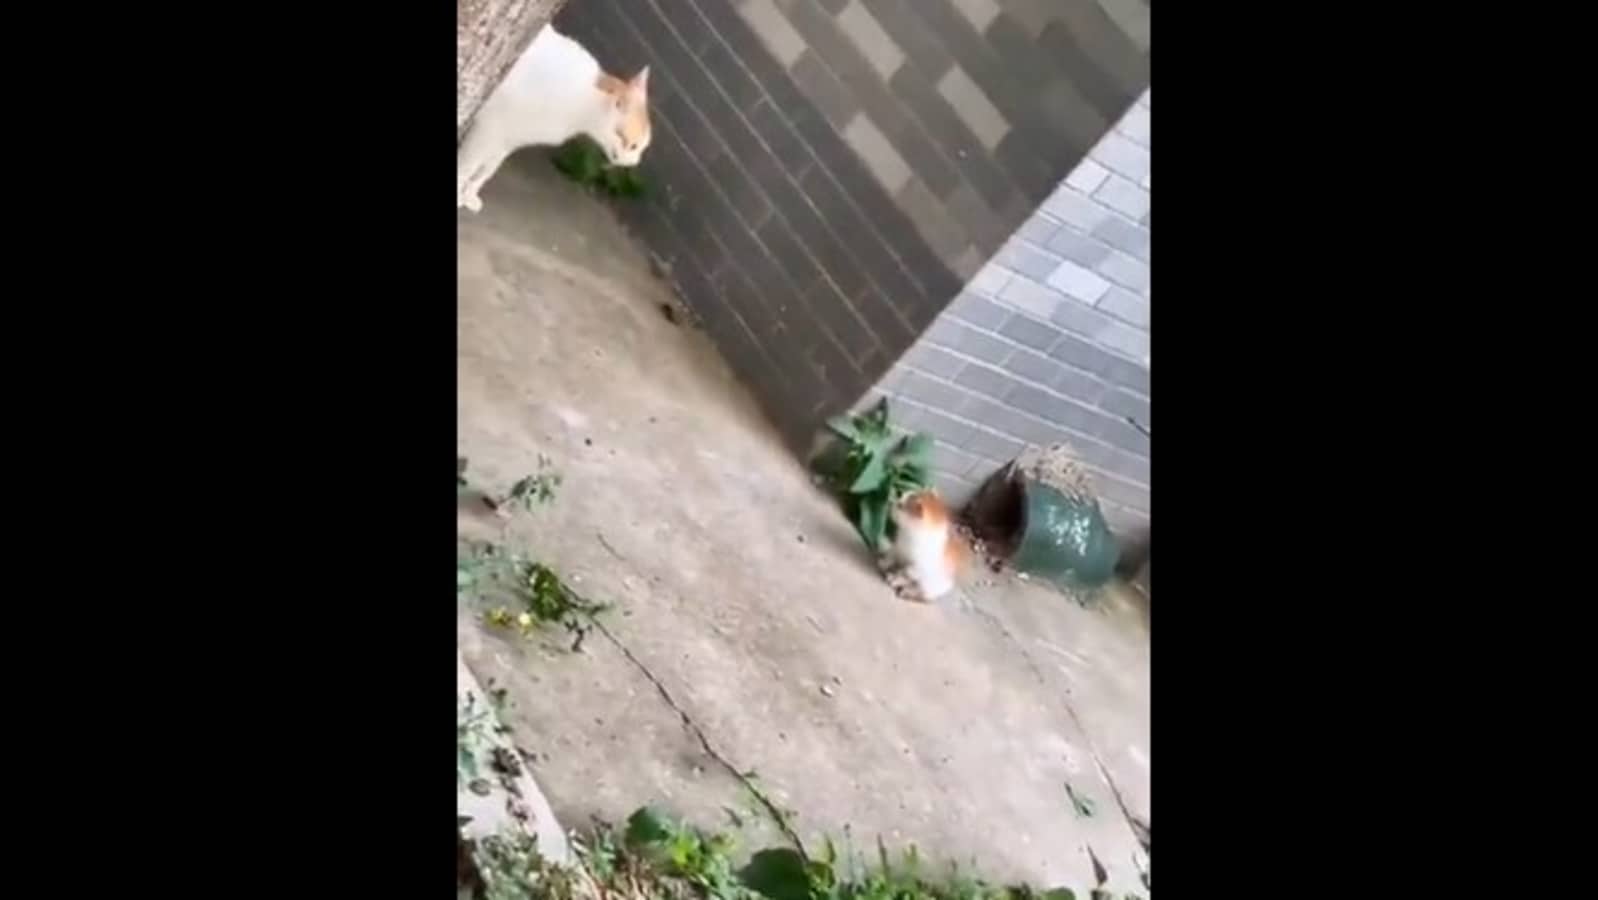 Mama cat scolds kitten, gives it a smack on the head